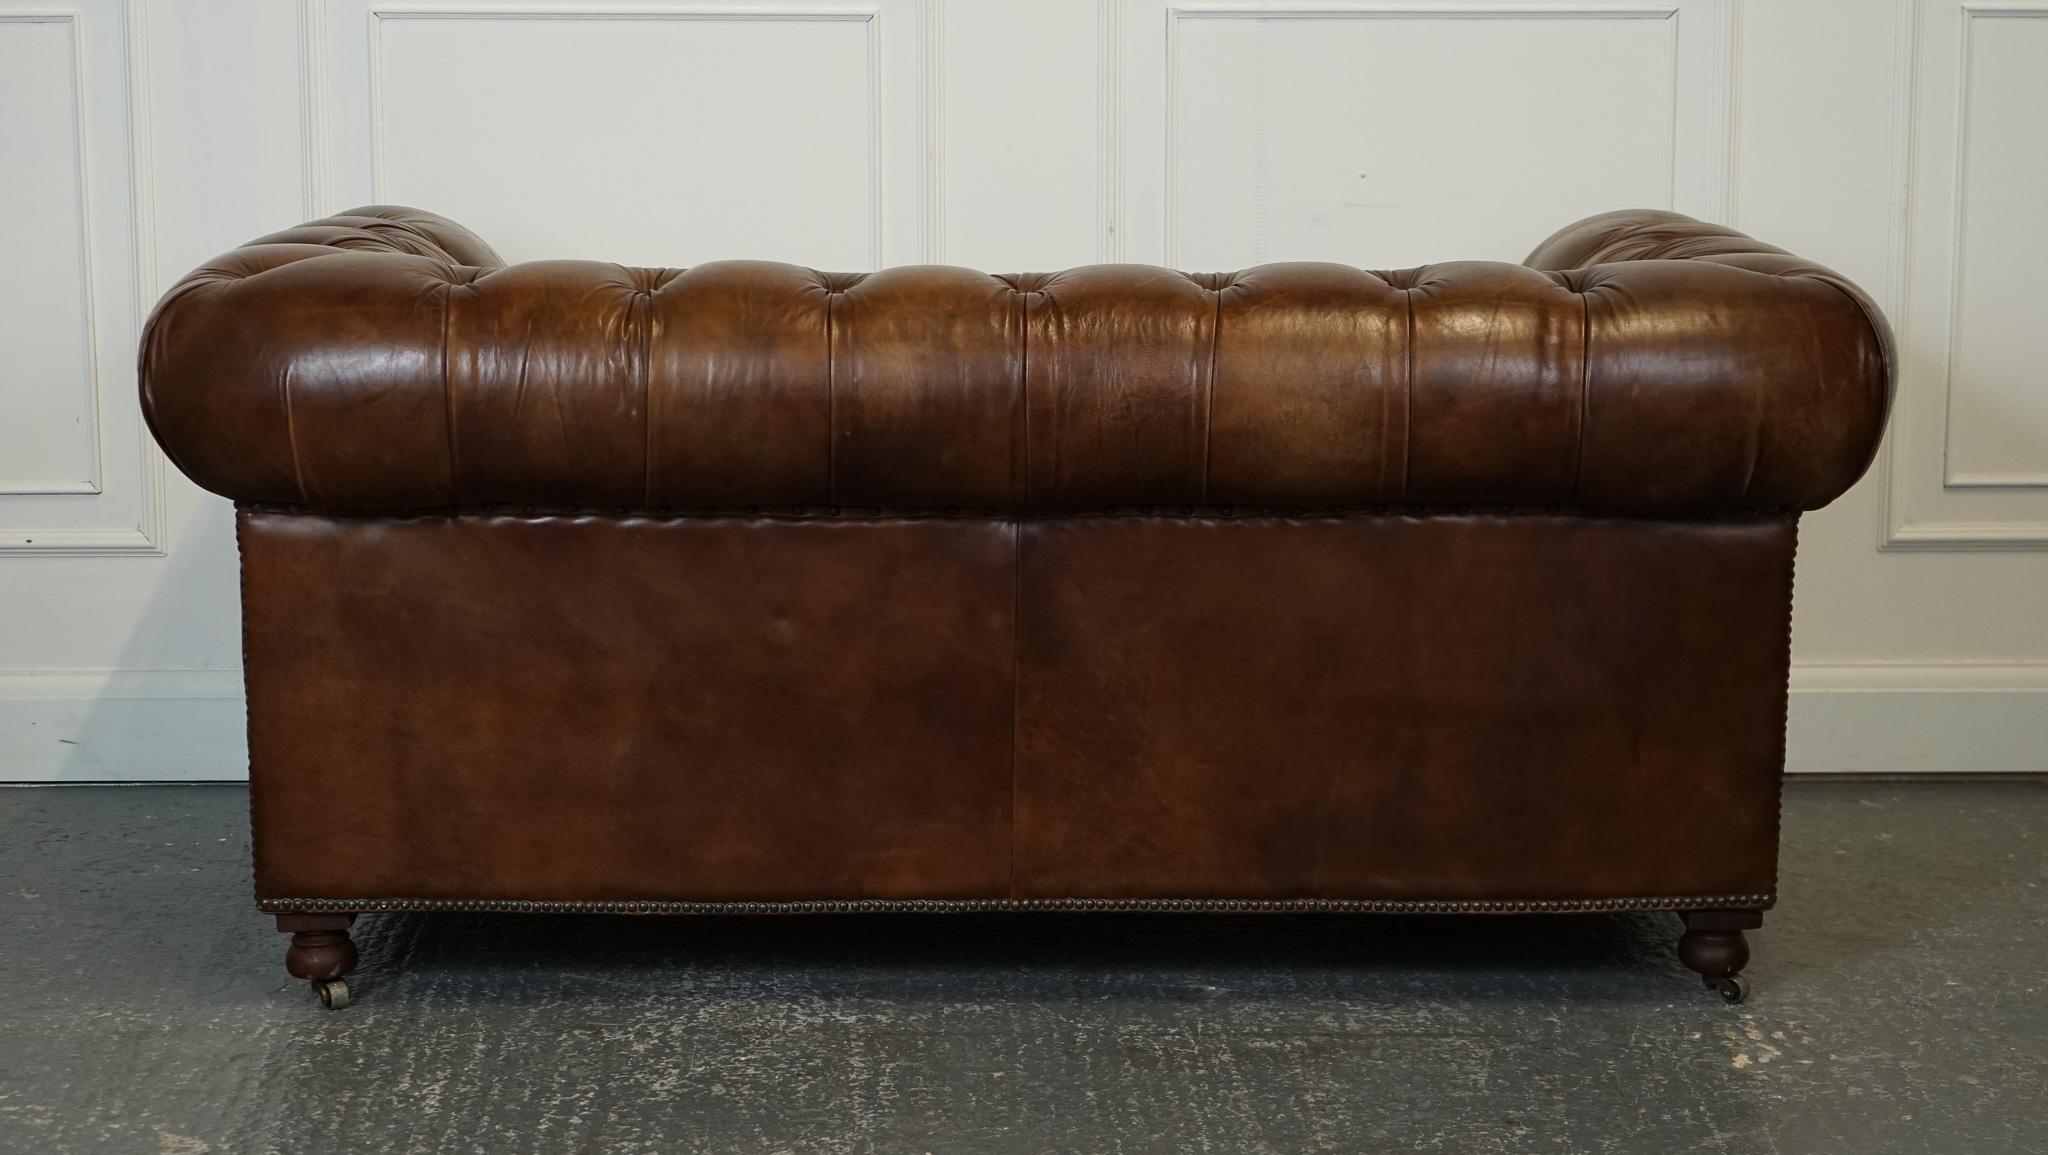 Leather GORGEOUS TIMOTHY OULTON CHESTERFIELD SOFA BY HALO HERiTAGE BROWN LEATHER J1 For Sale